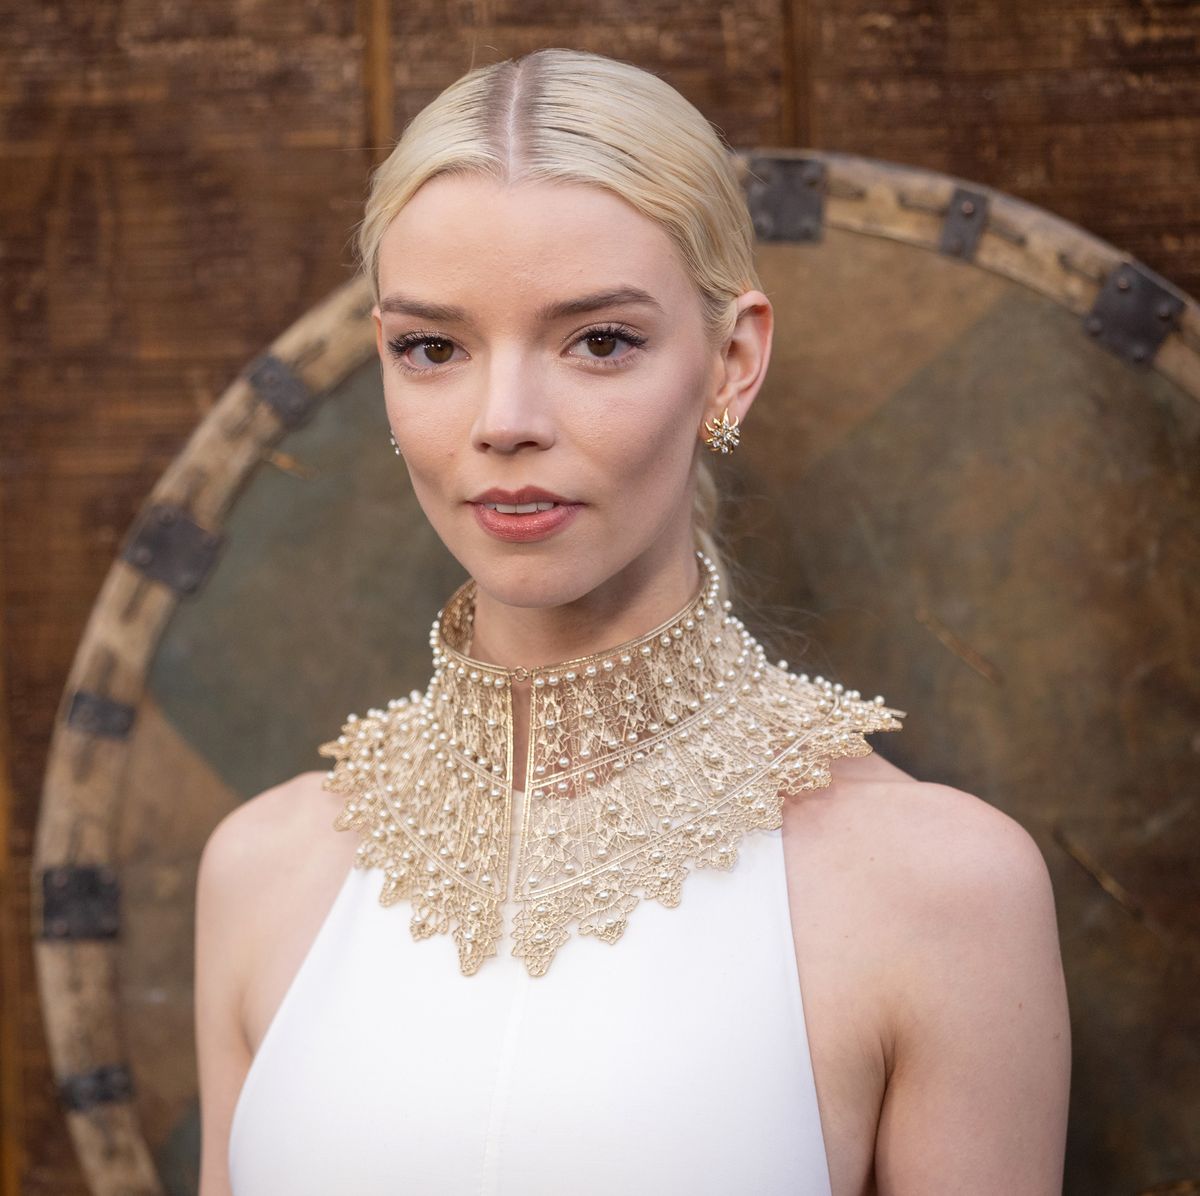 First look at Anya Taylor-Joy's transformation in Mad Max prequel